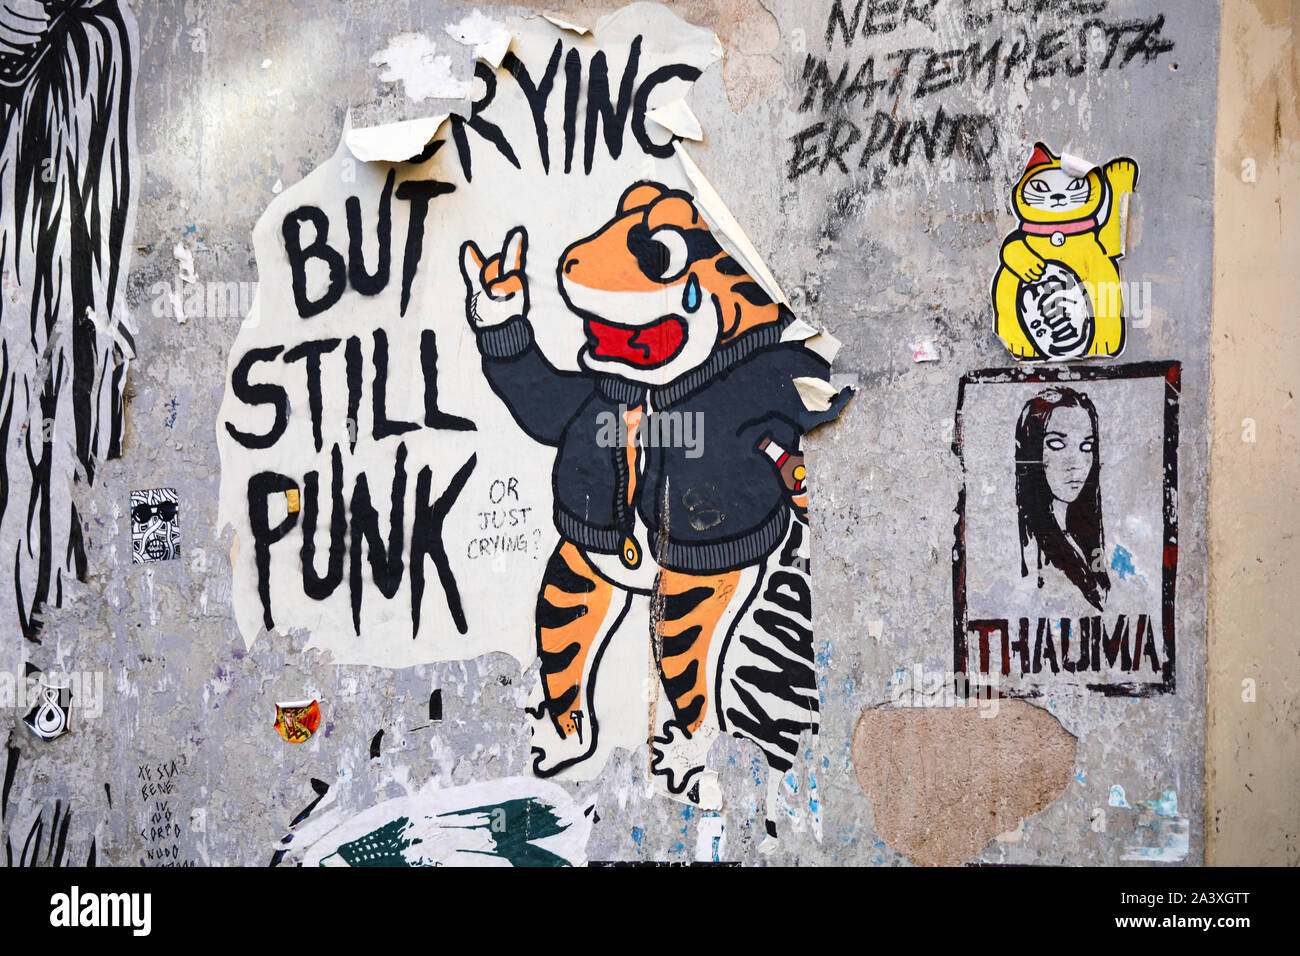 Crying but still punk - torn street art poster by Eiknarf in Trastevere district of Rome, Italy Stock Photo